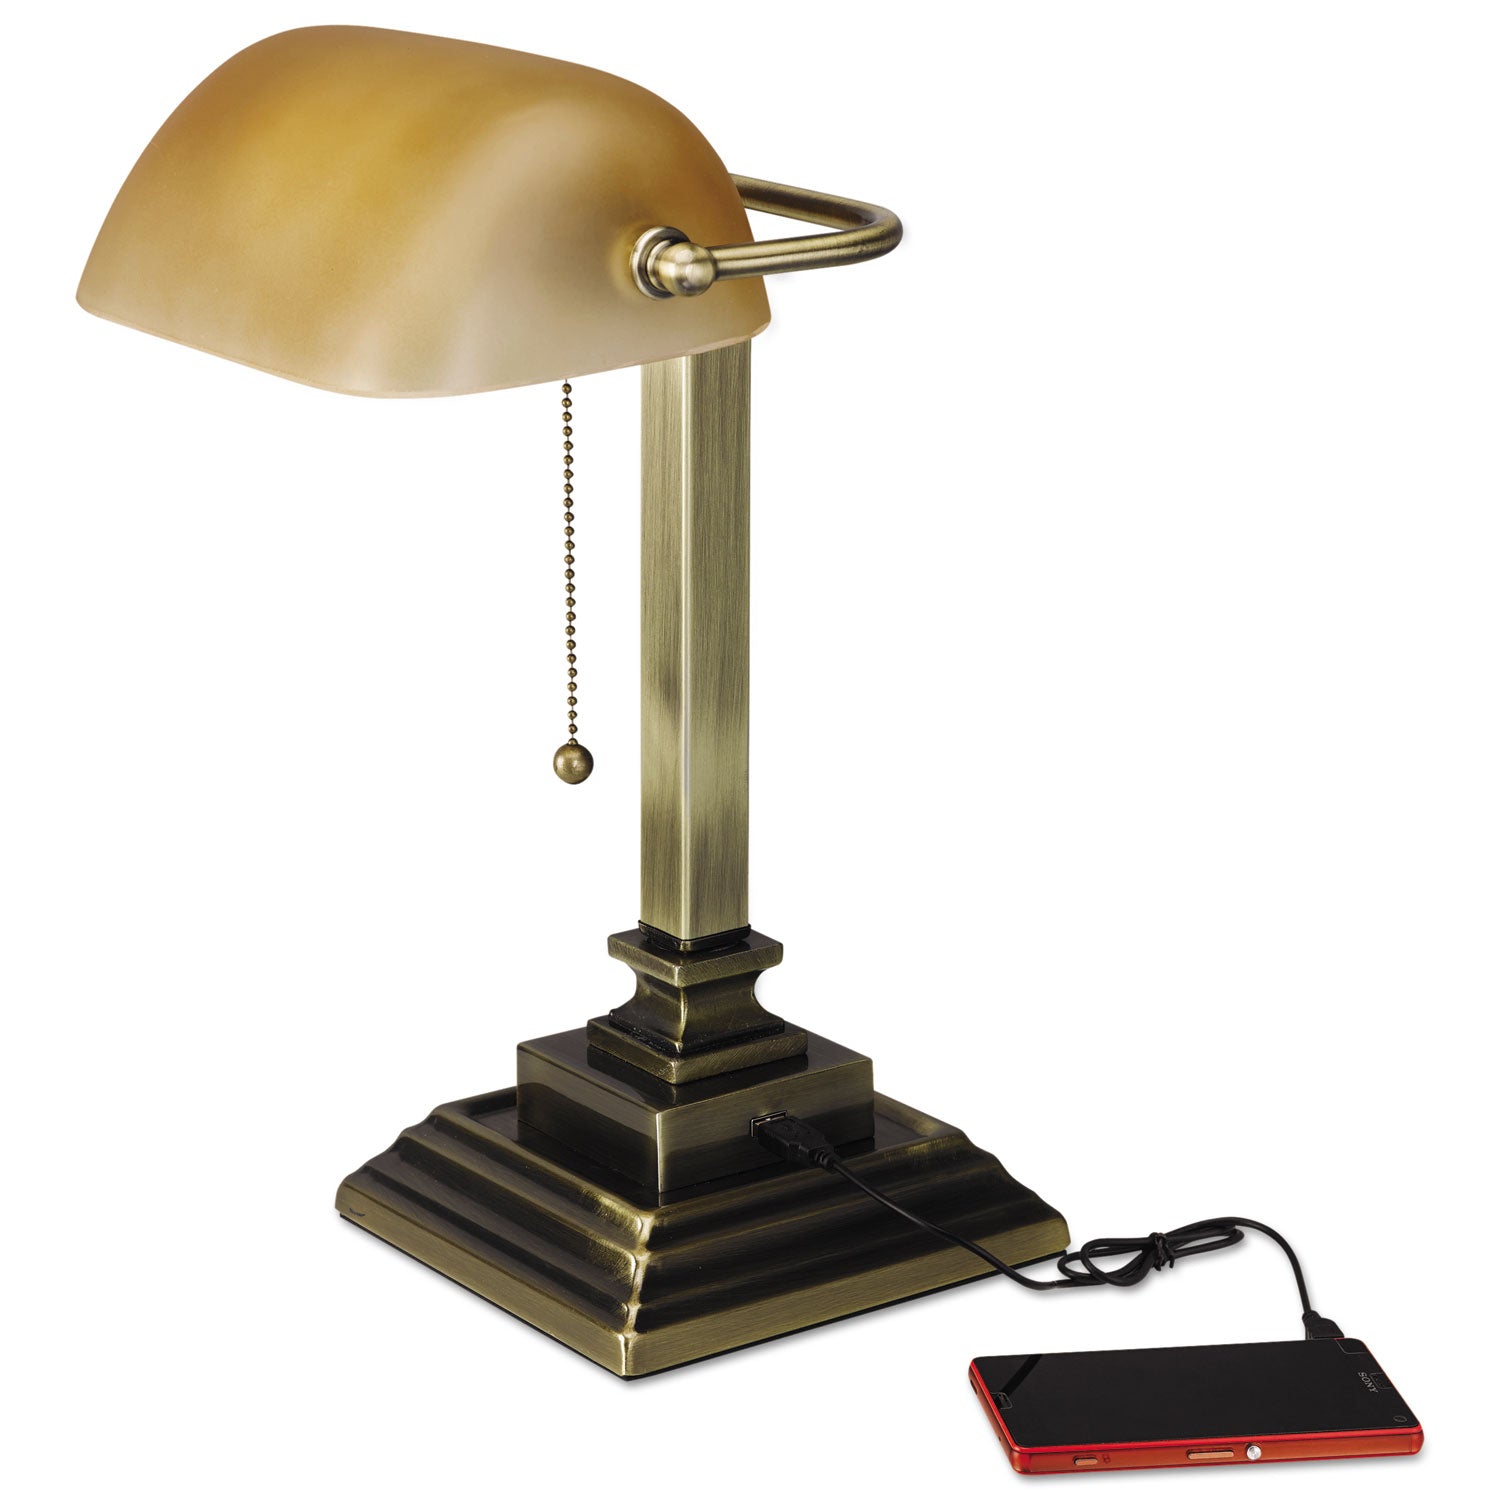 traditional-bankers-lamp-with-usb-10w-x-10d-x-15h-antique-brass_alelmp517ab - 1